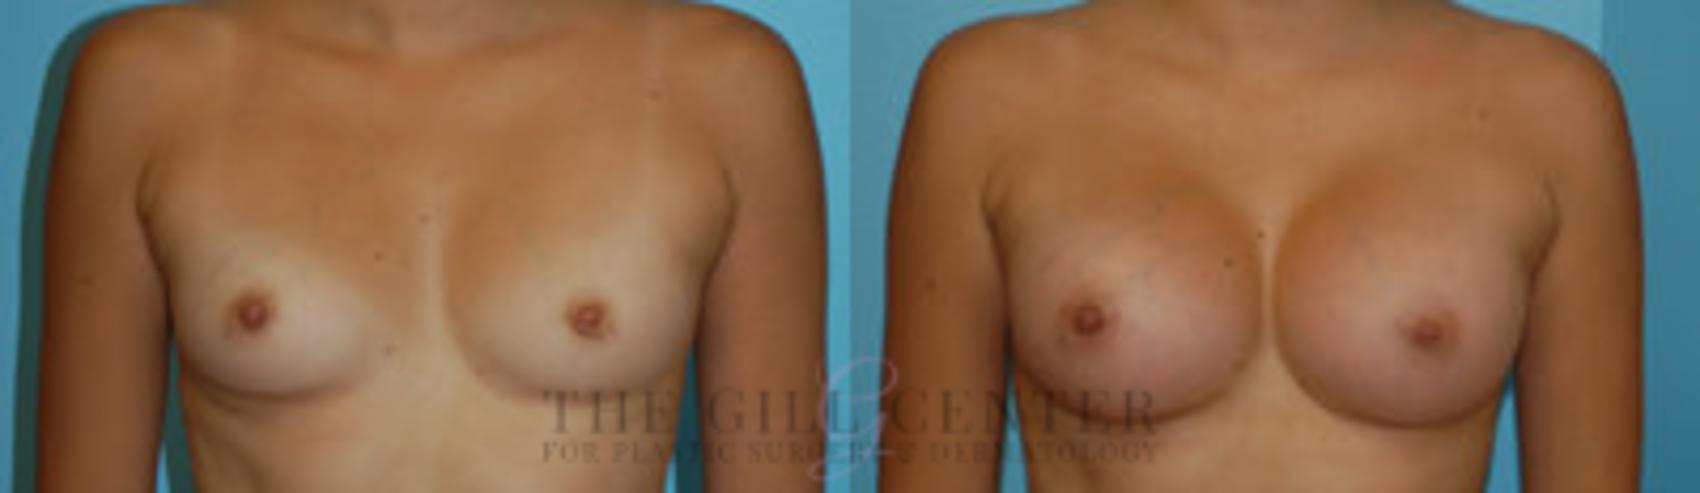 Breast Augmentation Case 58 Before & After Front | The Woodlands, TX | The Gill Center for Plastic Surgery and Dermatology